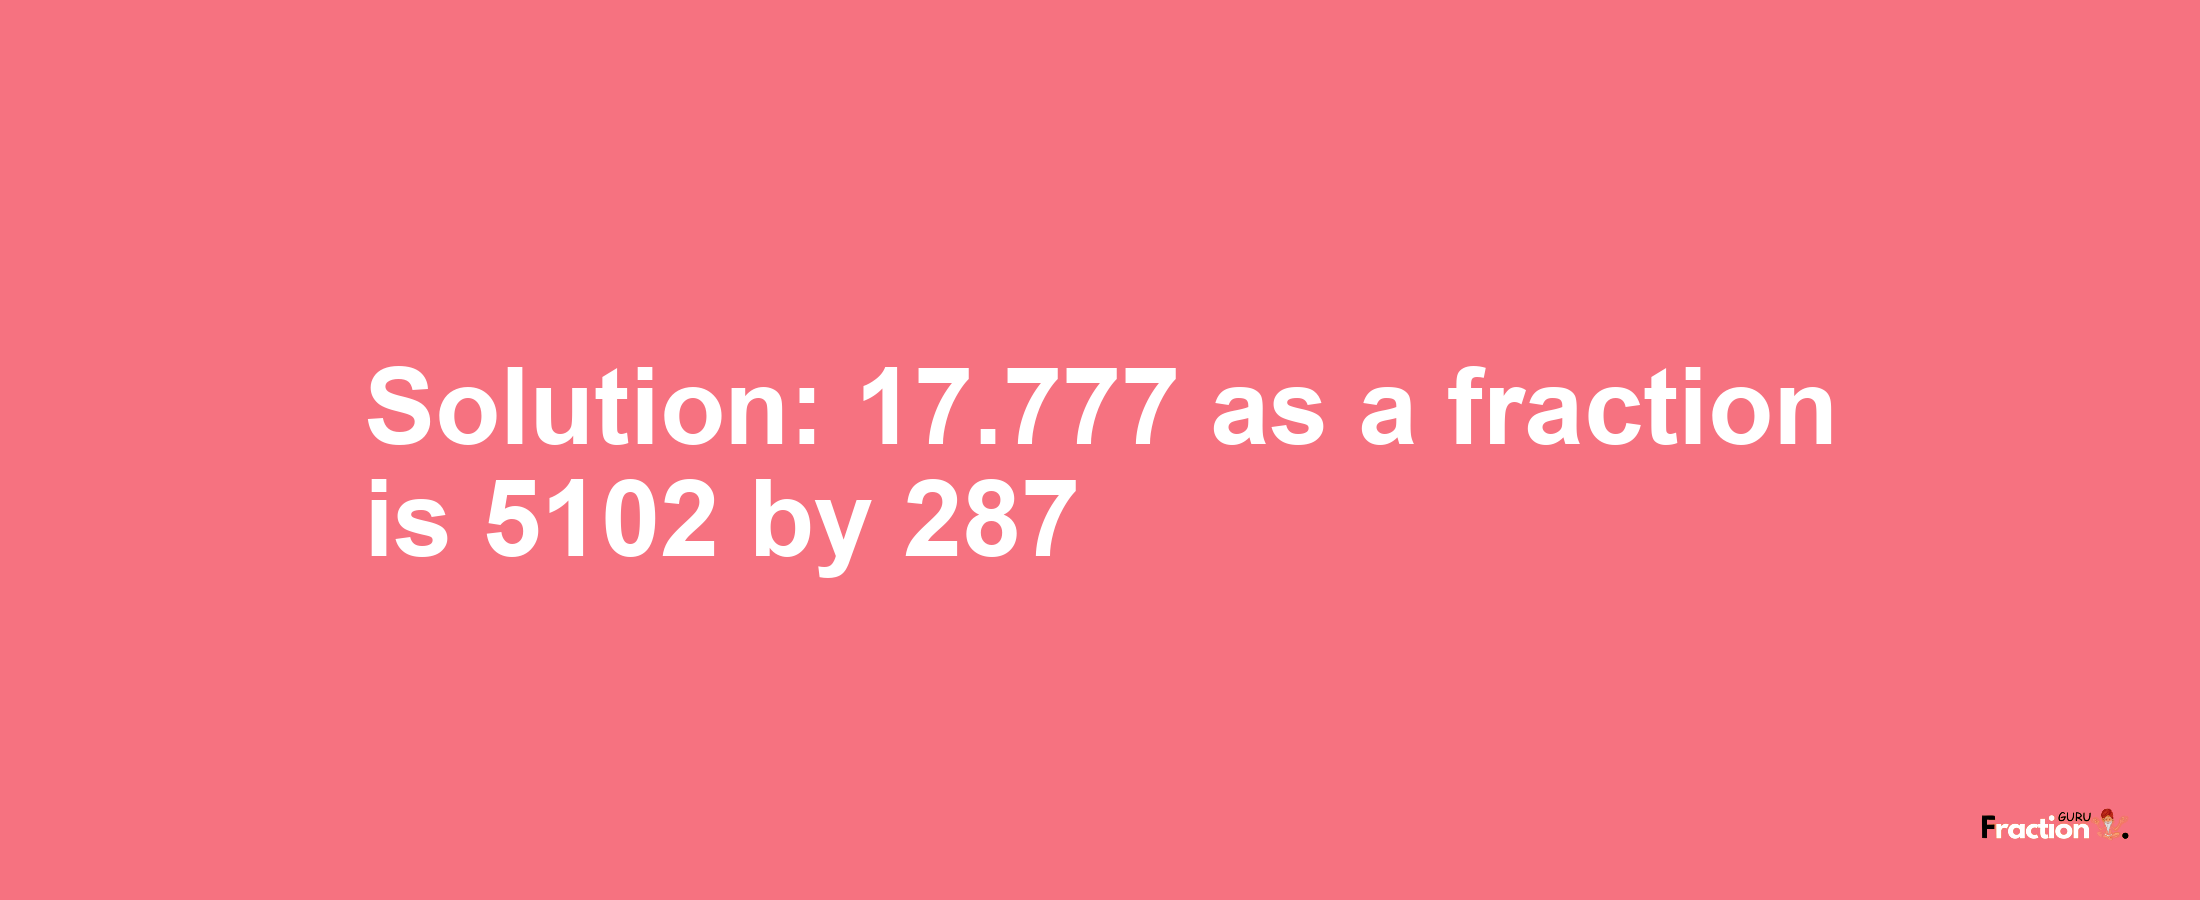 Solution:17.777 as a fraction is 5102/287